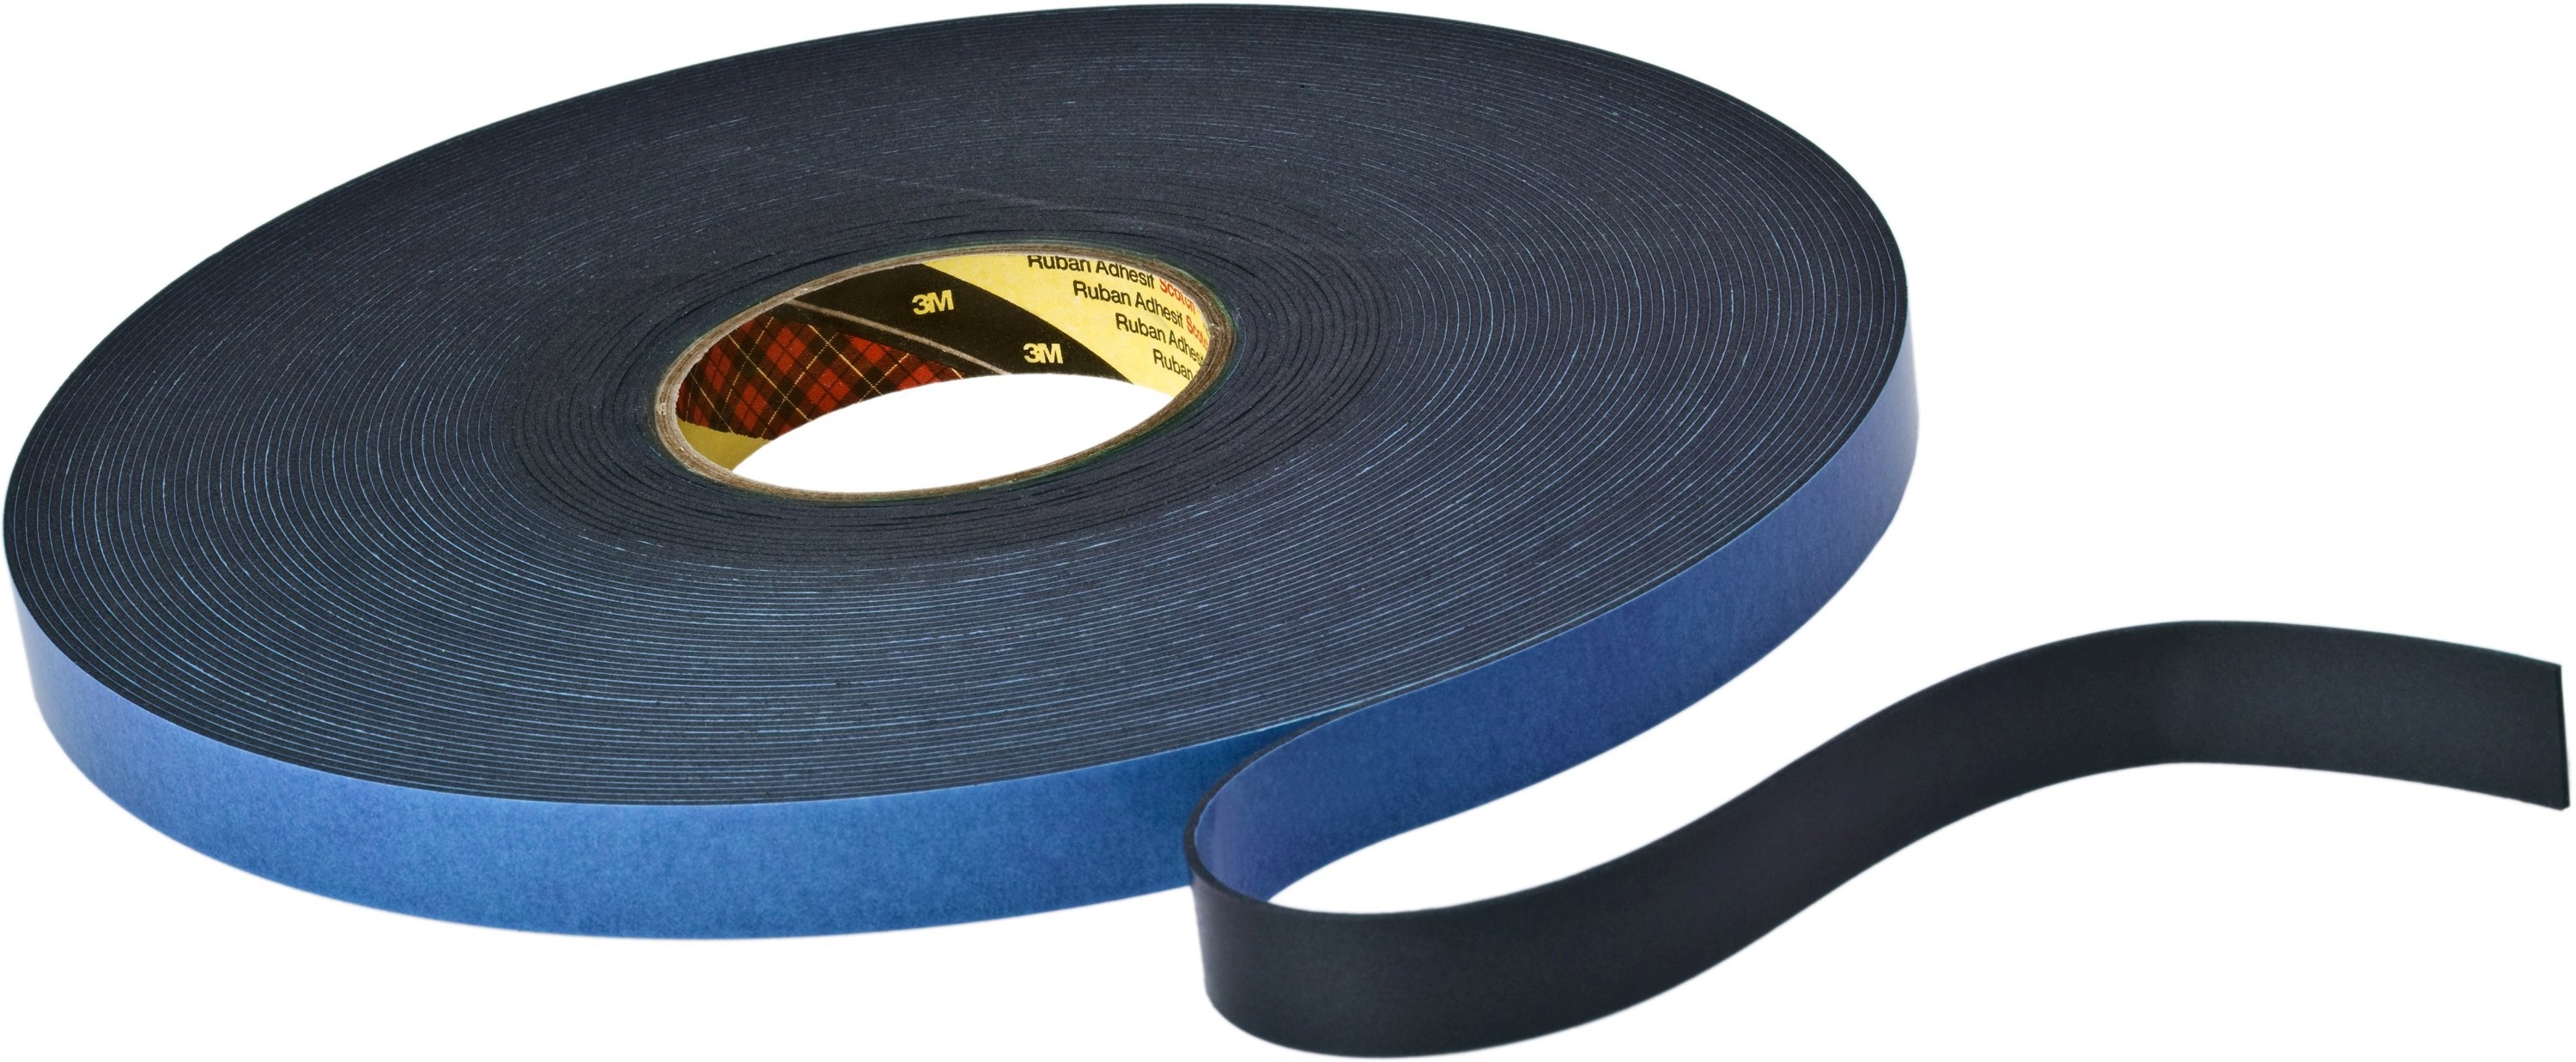 3M Double-sided PE foam tape with acrylic adhesive 9508B, black, 12 mm x 66 m, 0.8 mm